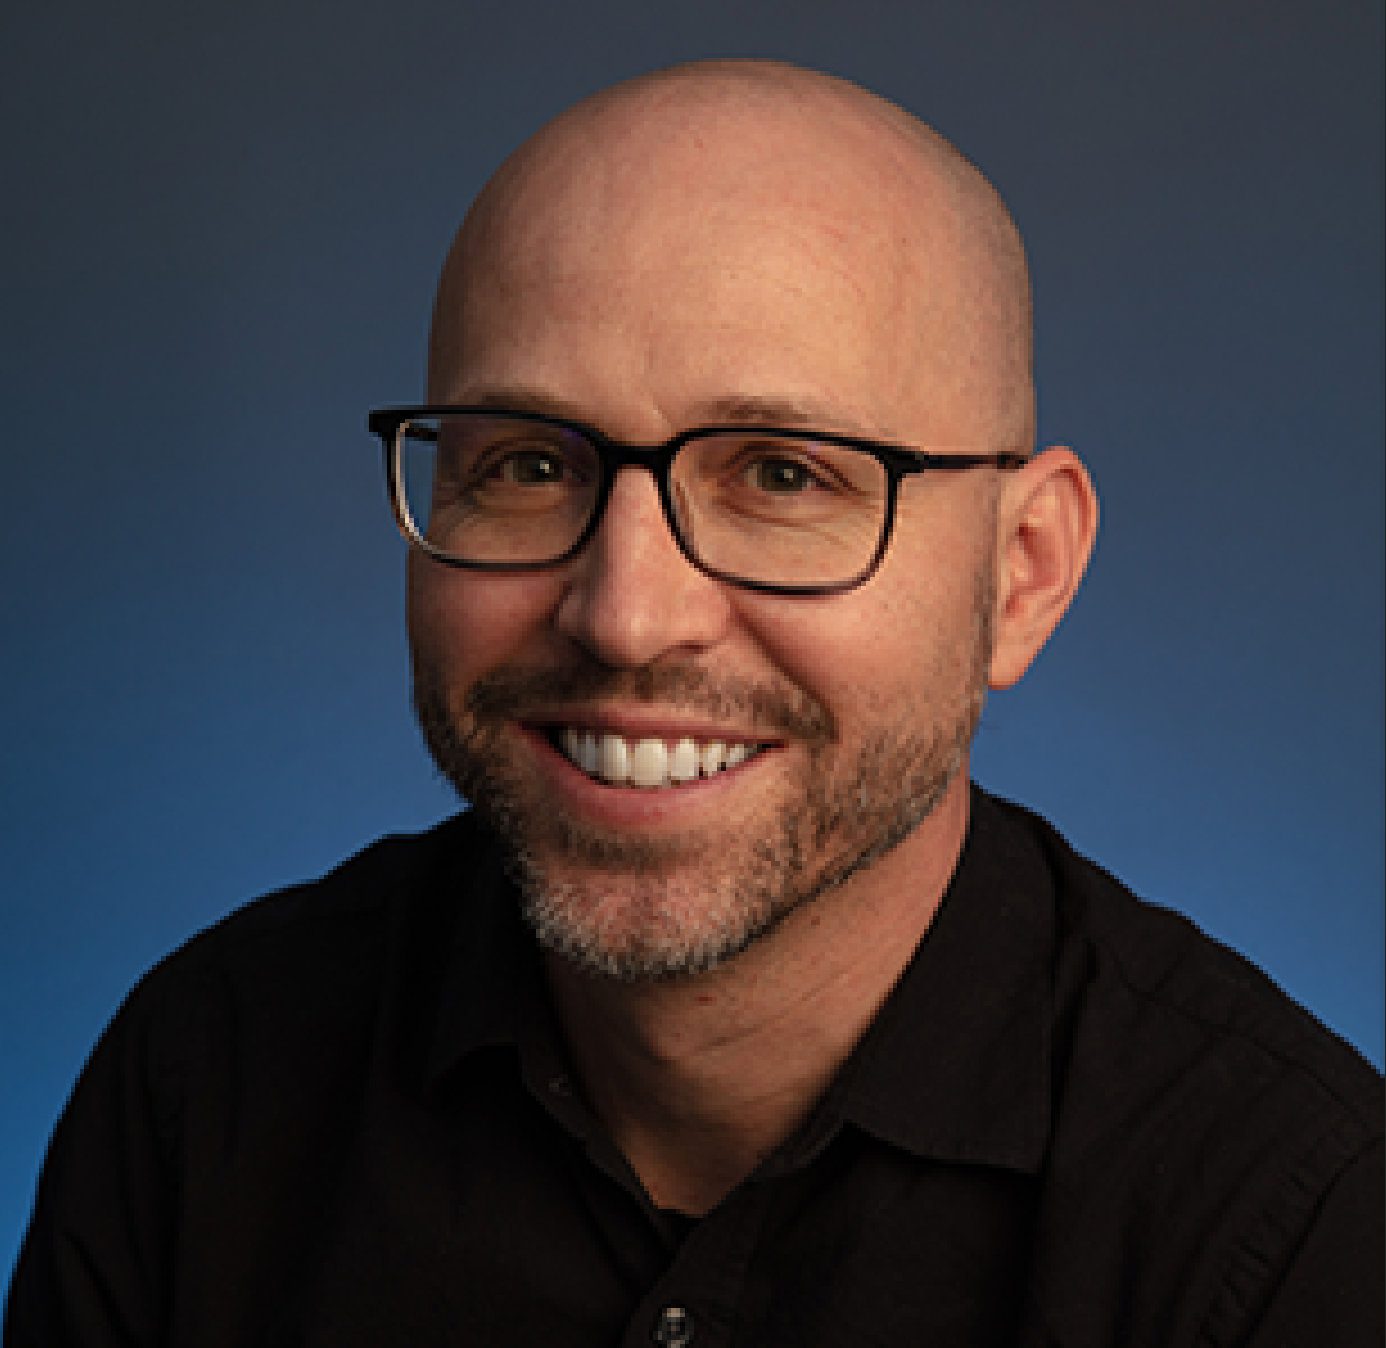 a person who is bald and has glasses and facial hair poses for a headshot in a black shirt